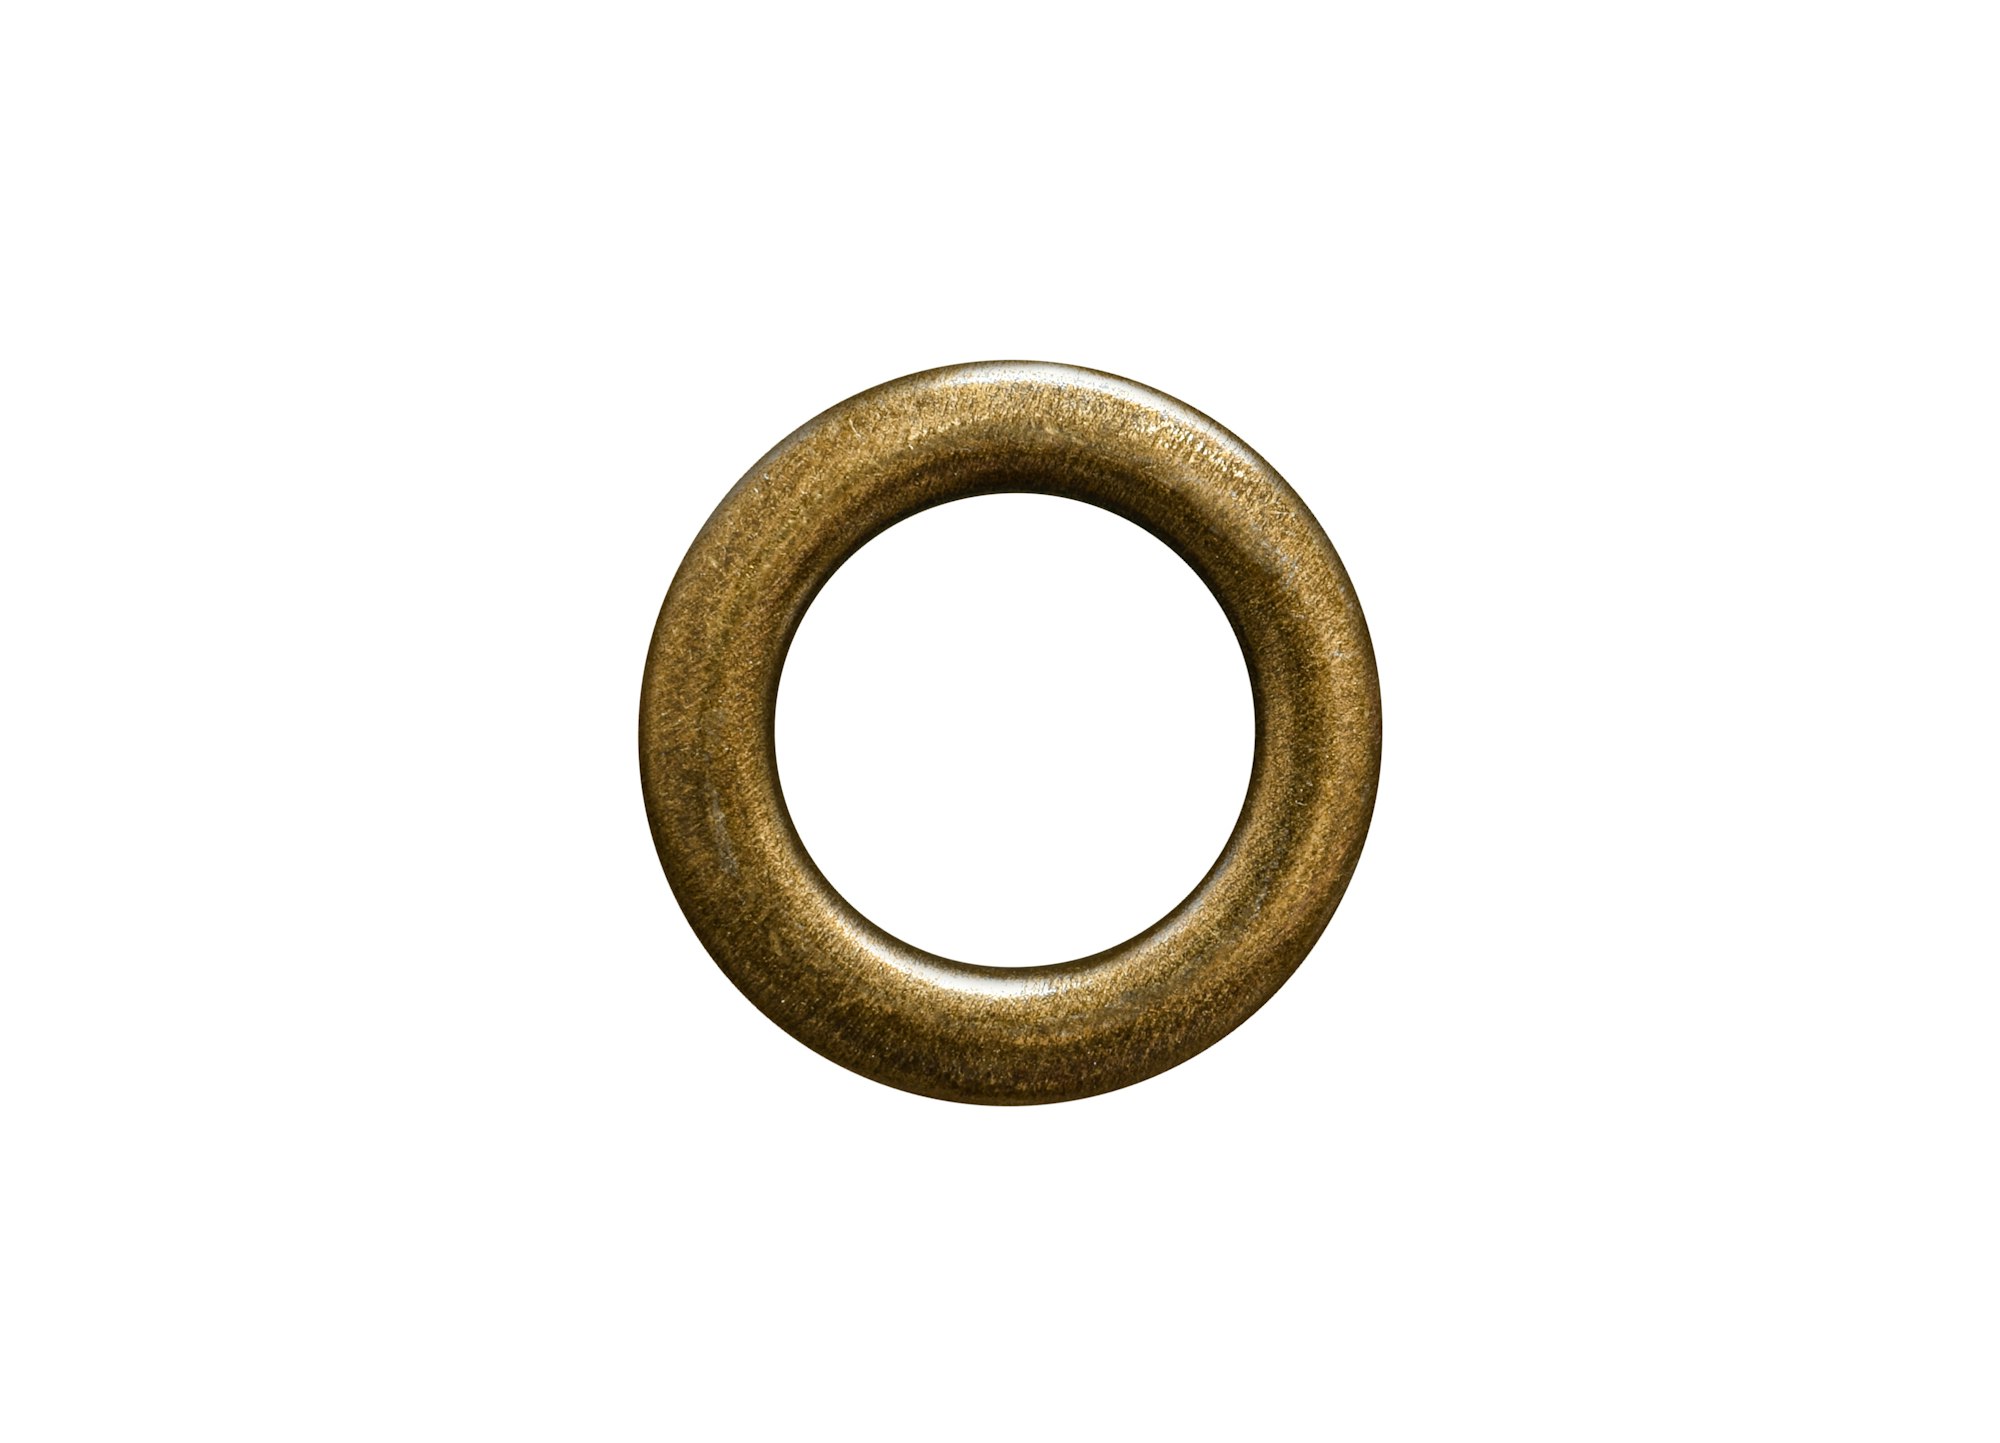 Golden brass metal eyelet grommet ring isolated cutout